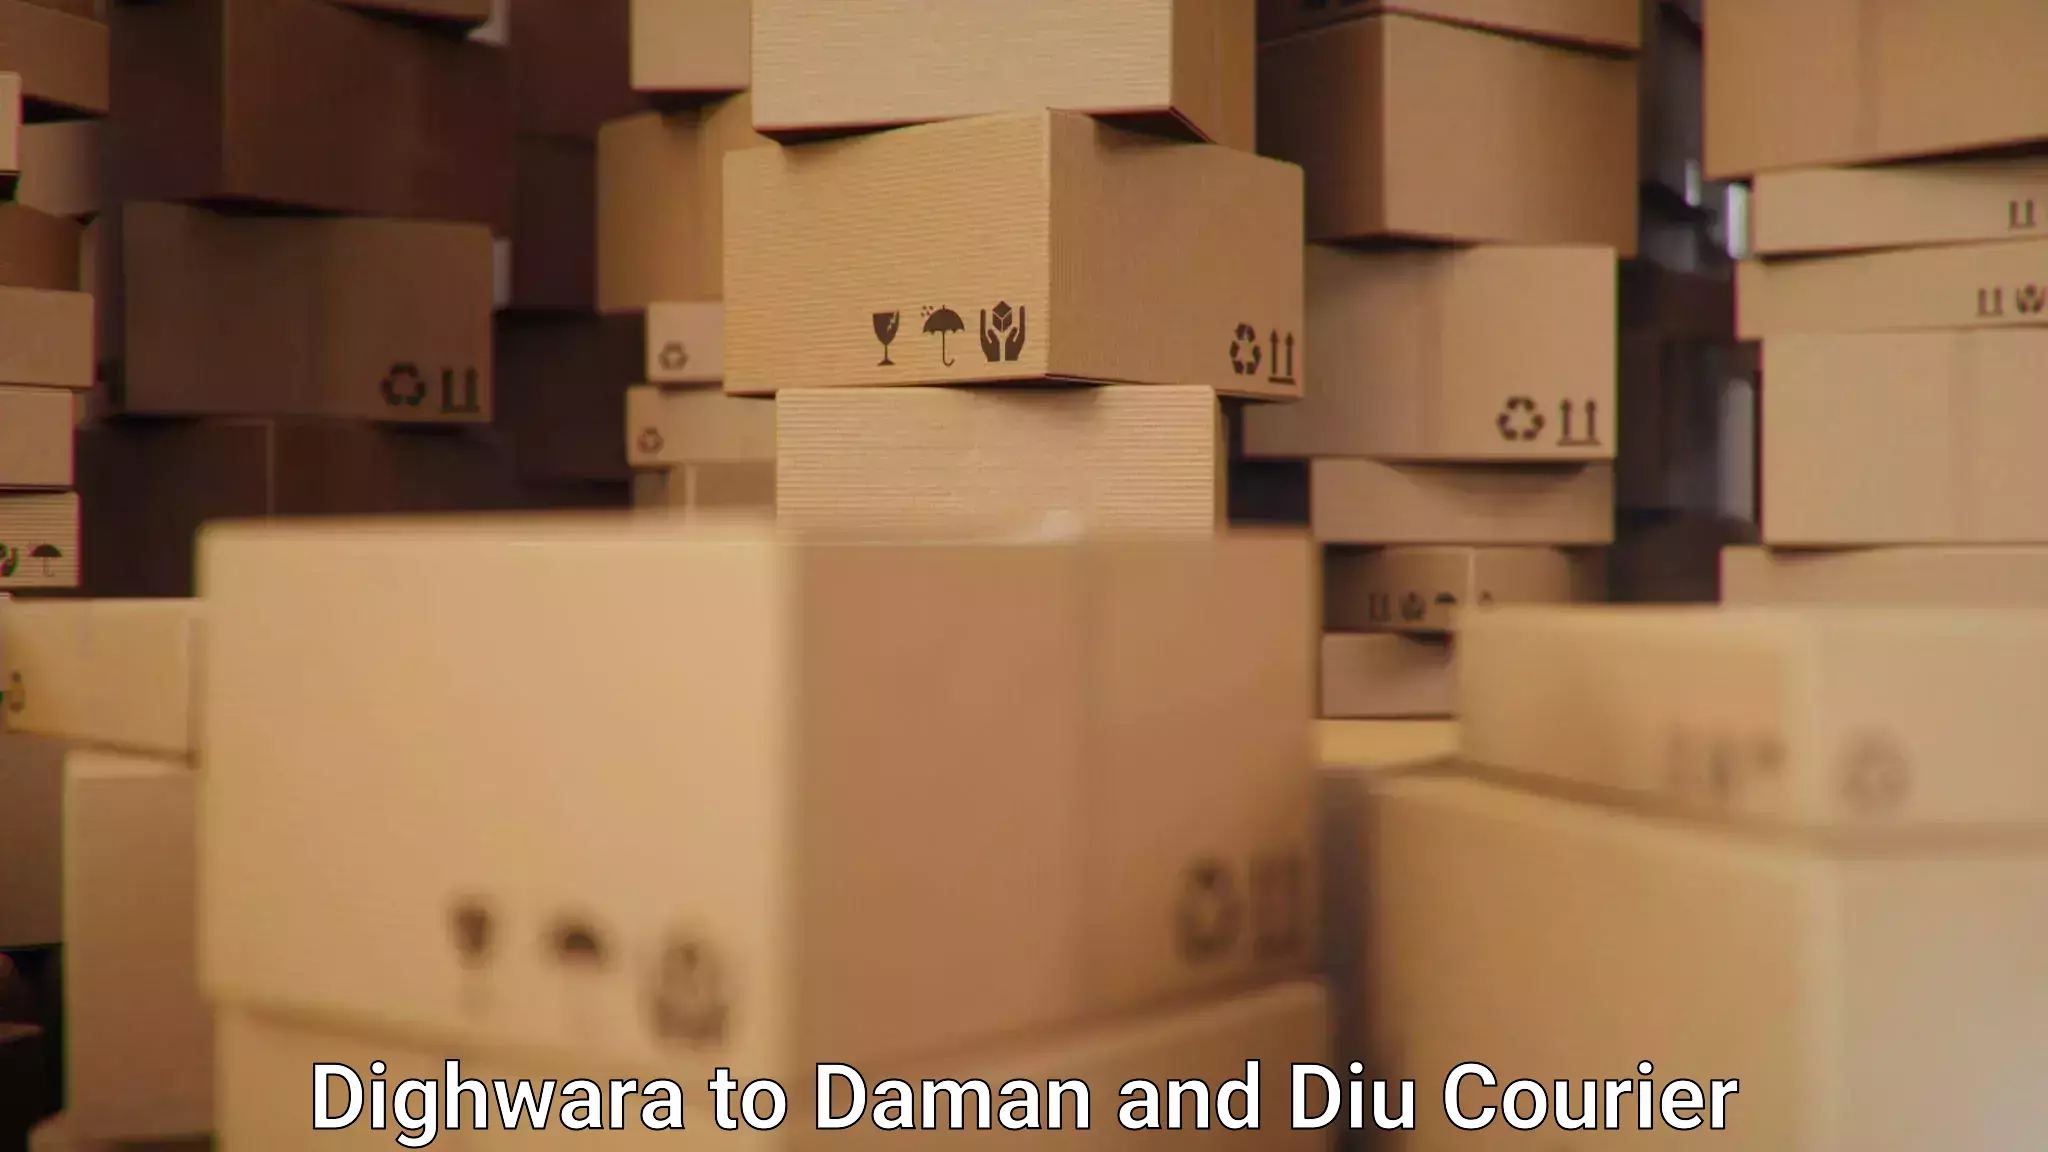 Multi-national courier services in Dighwara to Daman and Diu